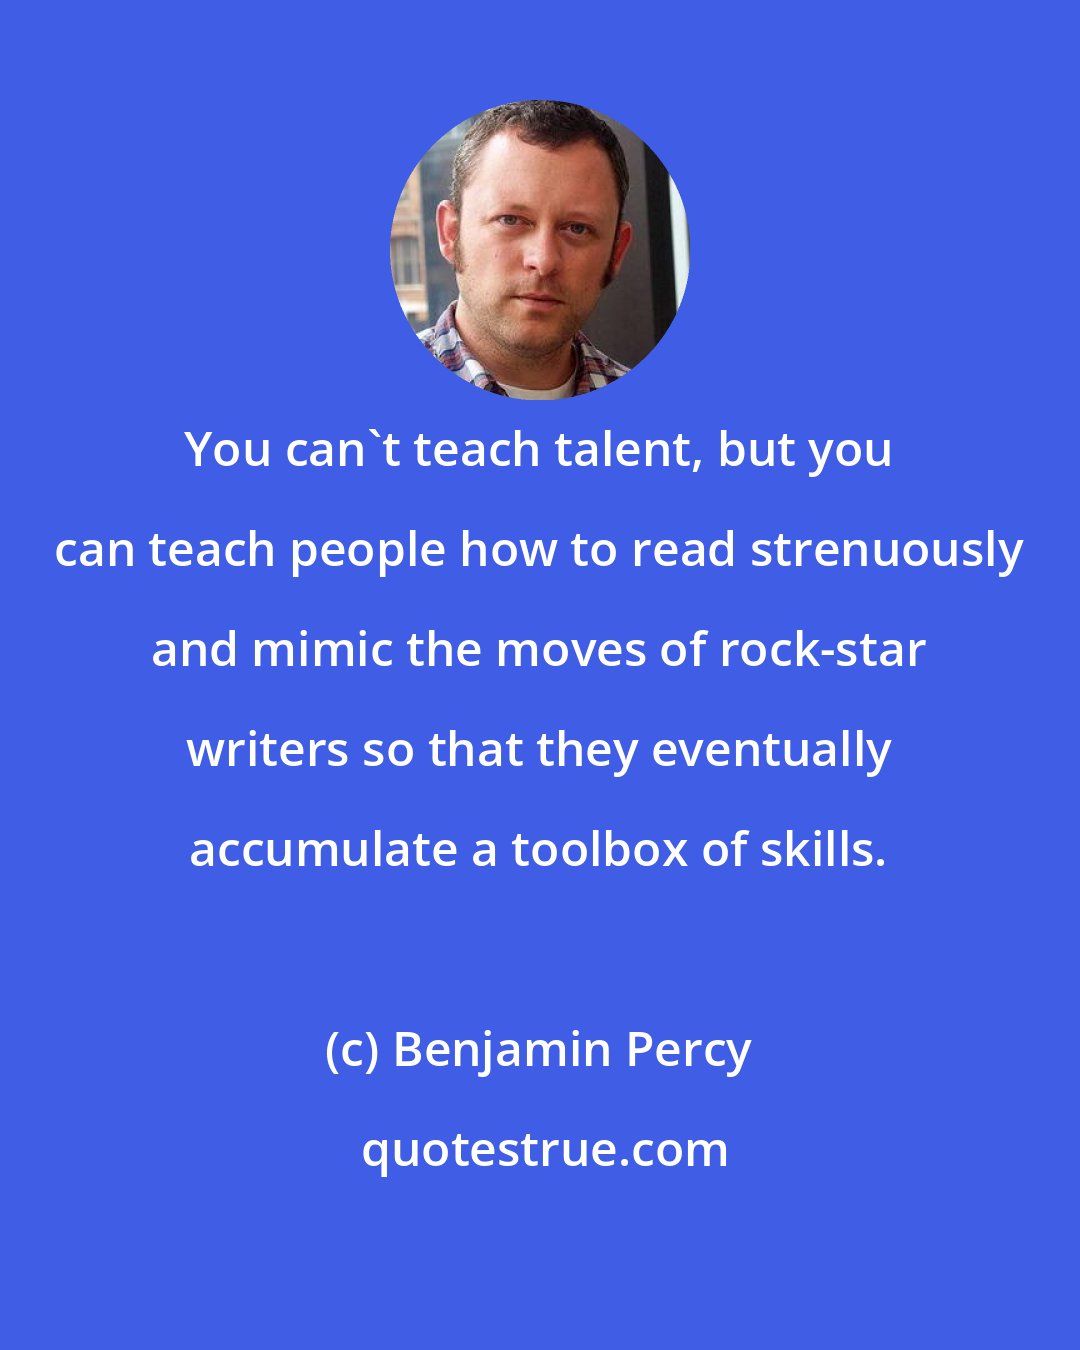 Benjamin Percy: You can't teach talent, but you can teach people how to read strenuously and mimic the moves of rock-star writers so that they eventually accumulate a toolbox of skills.